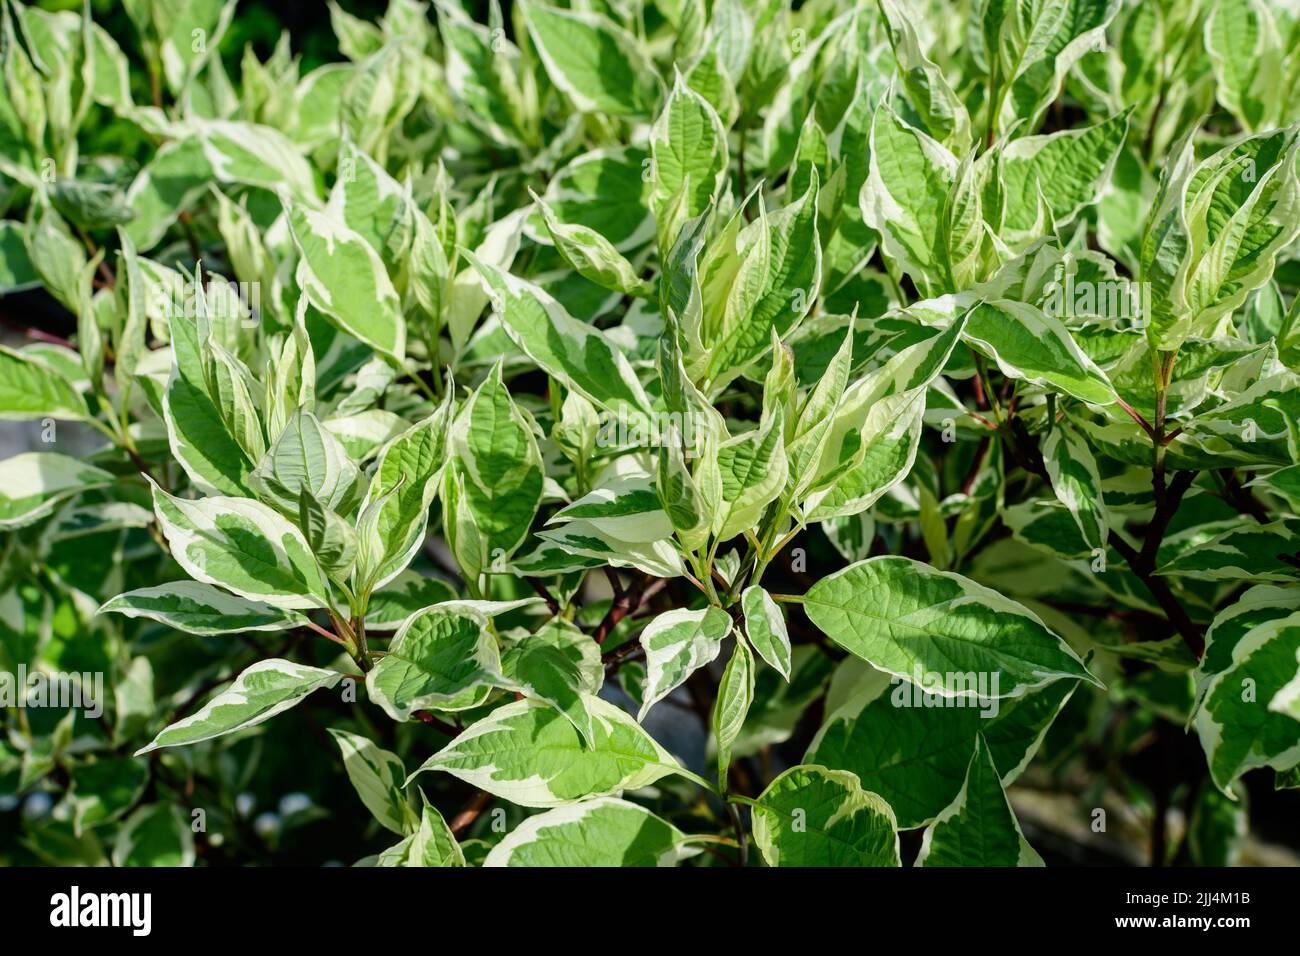 Many small vivid variegated green and white leaves on branches of Cornus Alba Elegantissima shrub in a garden in a sunny spring day, beautiful outdoor Stock Photo